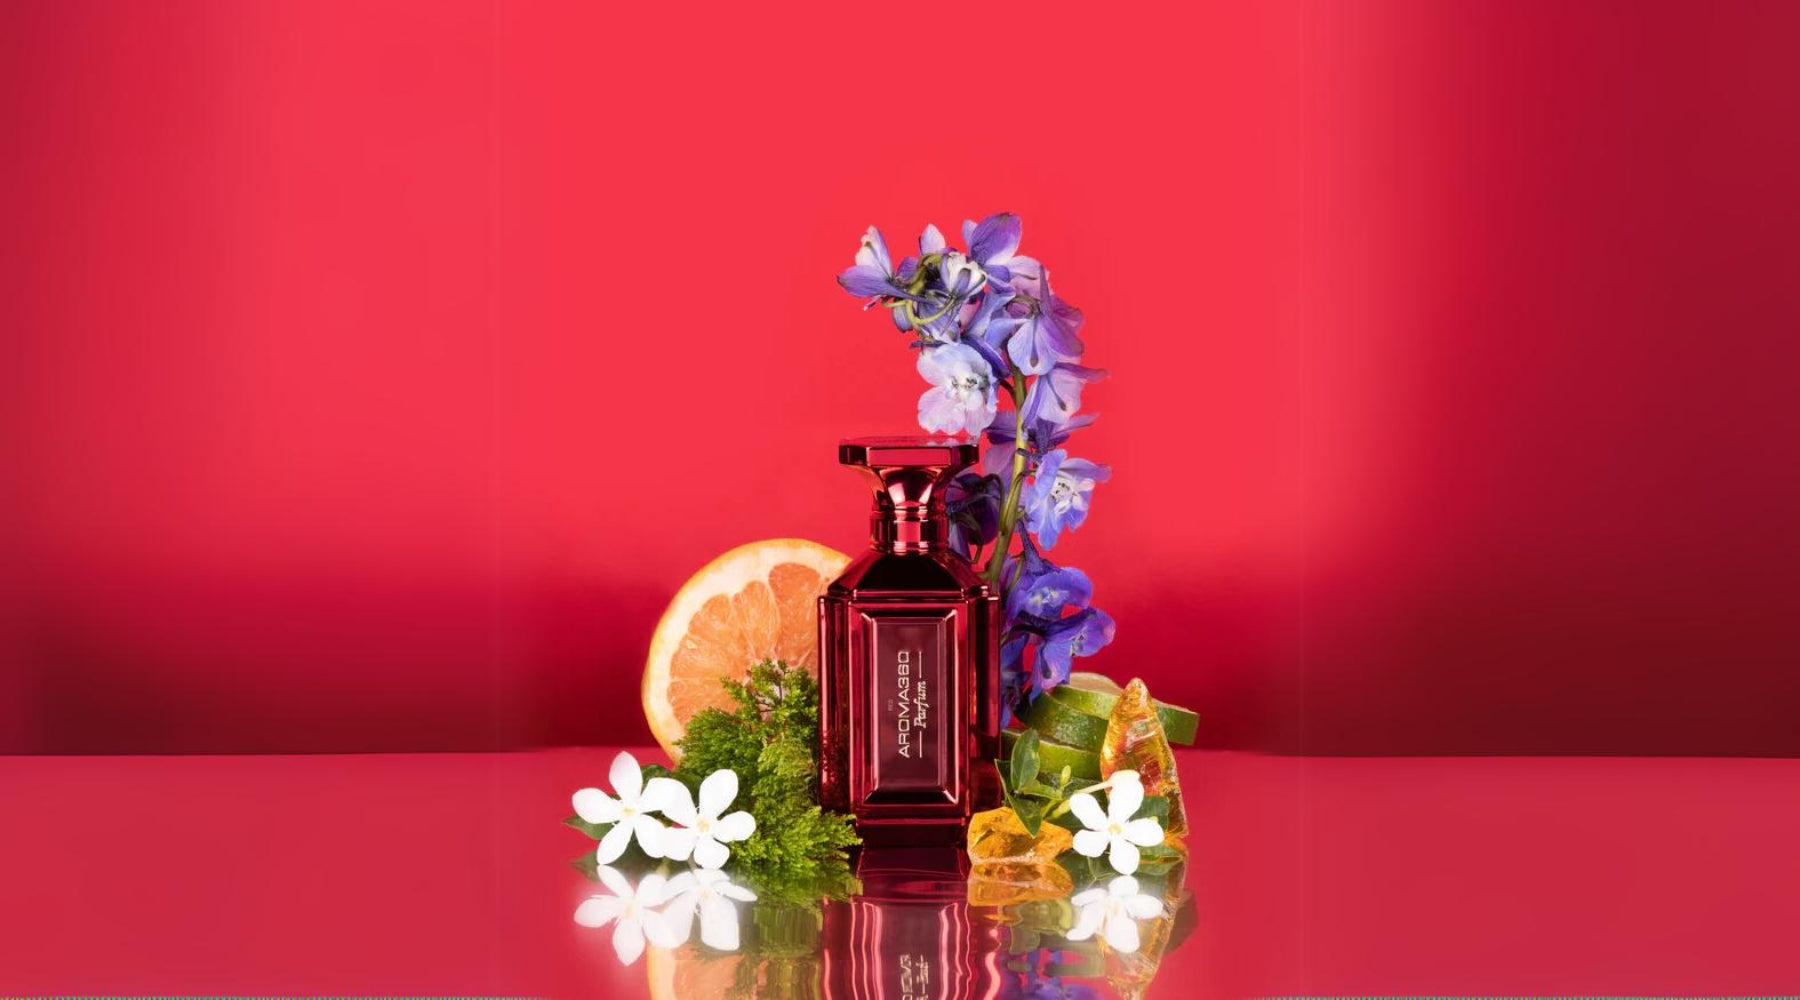 Aroma360's Red perfume surrounded by a grapefruit, bergamot, and jasmine against a red backdrop.